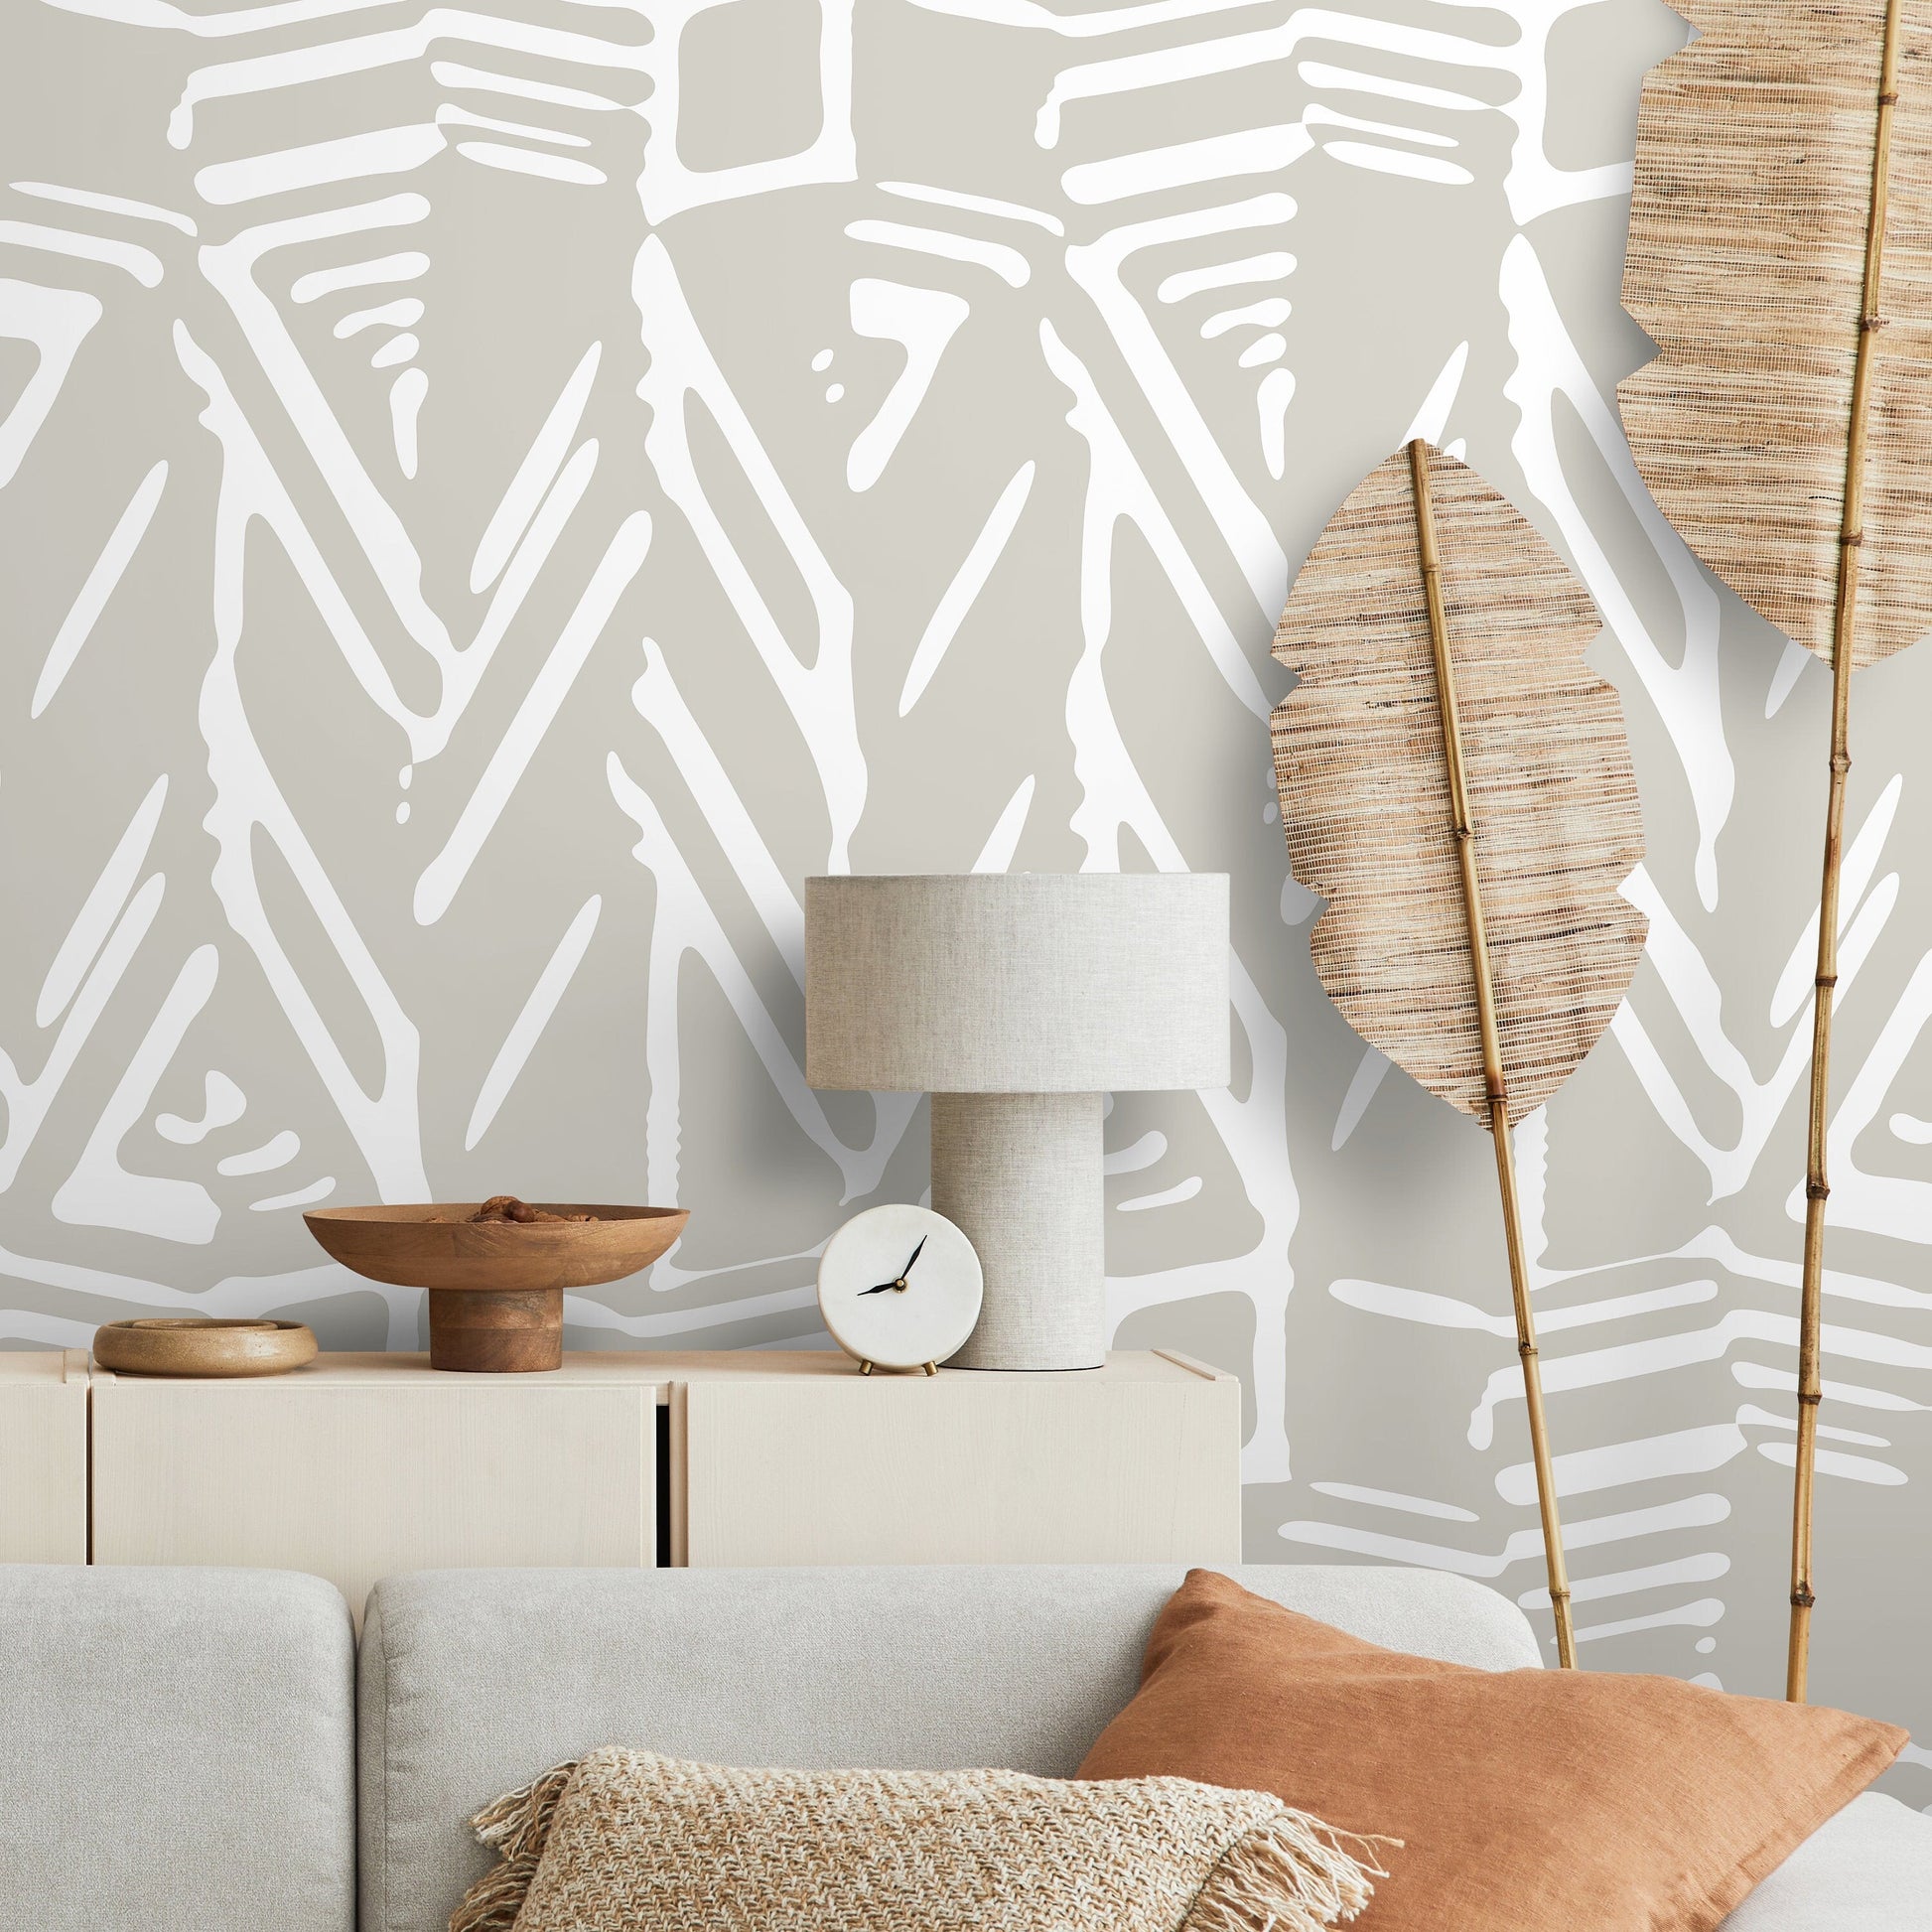 Wallpaper Peel and Stick Wallpaper Removable Wallpaper Home Decor Wall Art Wall Decor Room Decor / White and Beige Abstract Wallpaper- C569